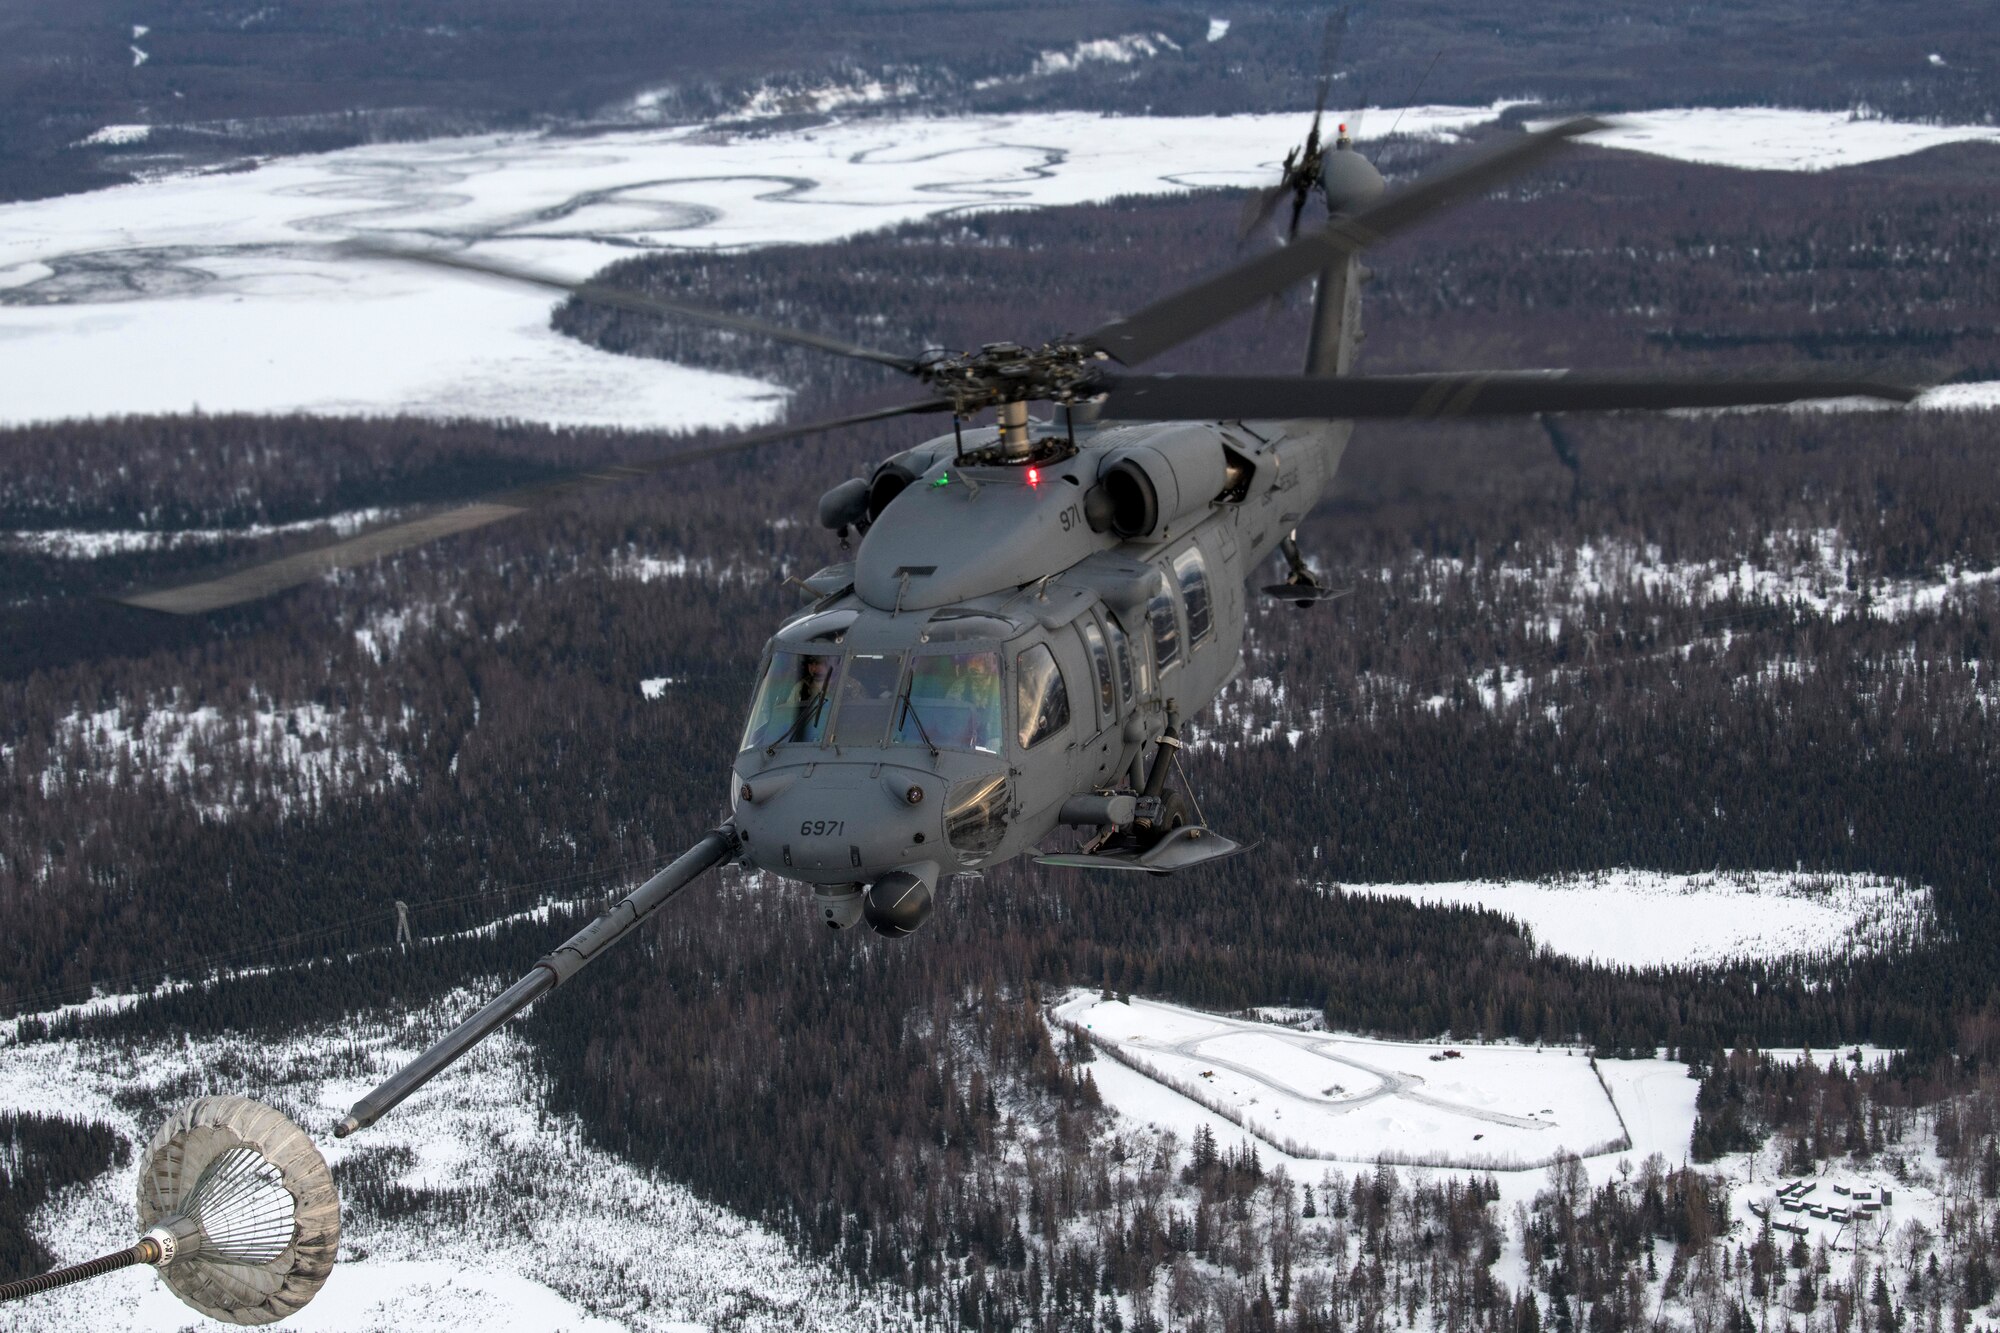 A U.S Air Force HH-60G Pave Hawk helicopter assigned to the 210th Rescue Squadron, Alaska Air National Guard, conducts aerial refueling from a U.S. Air Force HC-130J Combat King II assigned to the 211th Rescue Squadron, Alaska Air National Guard, over Alaska, Jan. 21, 2021, during Operation Noble Defender. Operation Noble Defender is a North American Air Defense Command air-defense operation which allows dynamic training for operational readiness in an arctic environment.